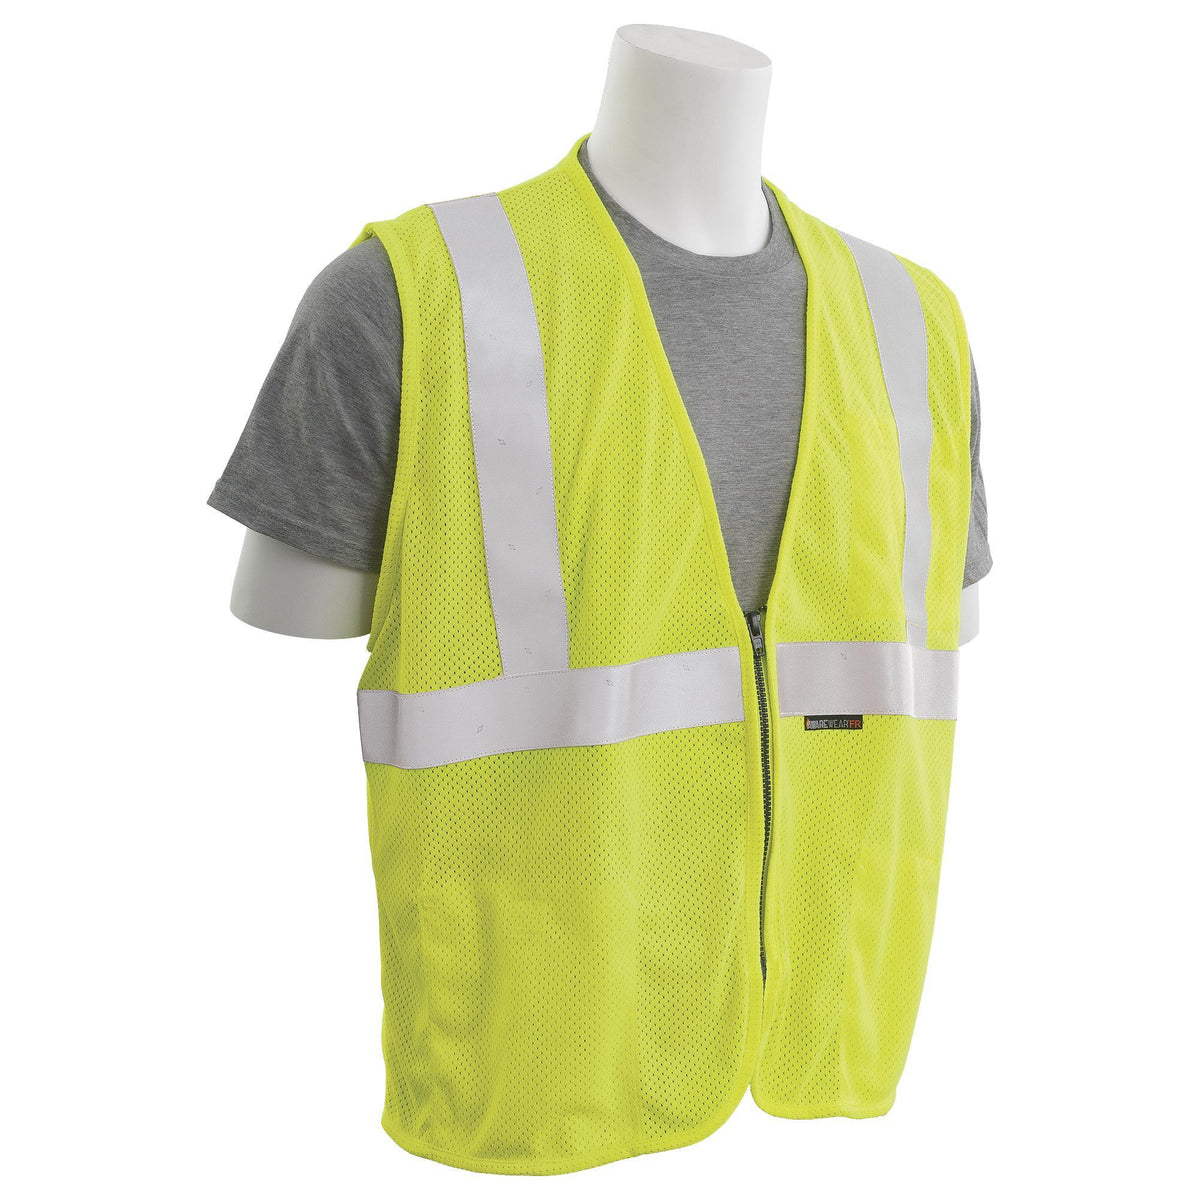 IFR152Z Class 2 Inherently Flame Resistant Zippered Mesh Safety Vest 1pc